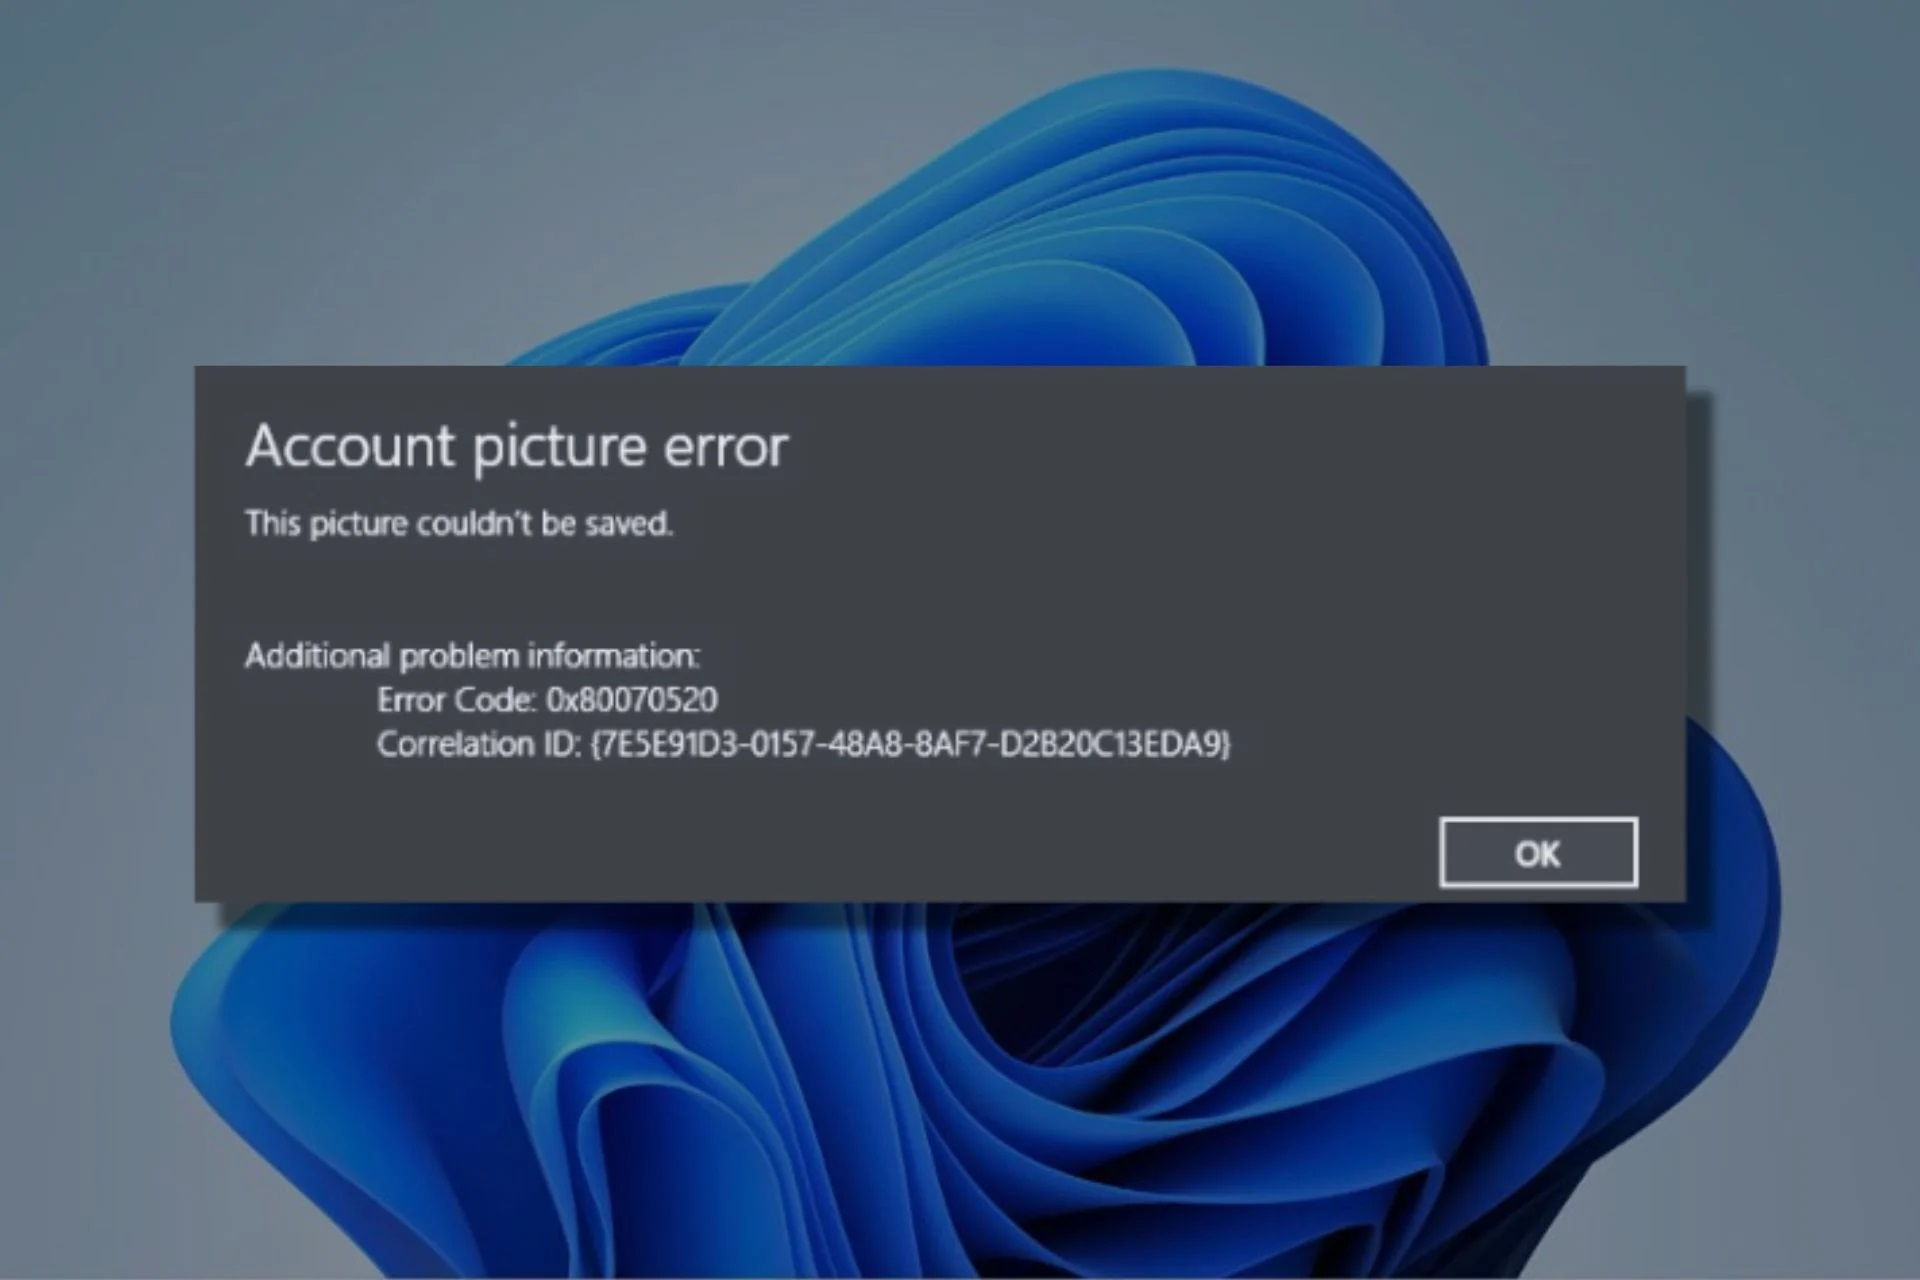 The new KB5039213 may trigger the account picture error again